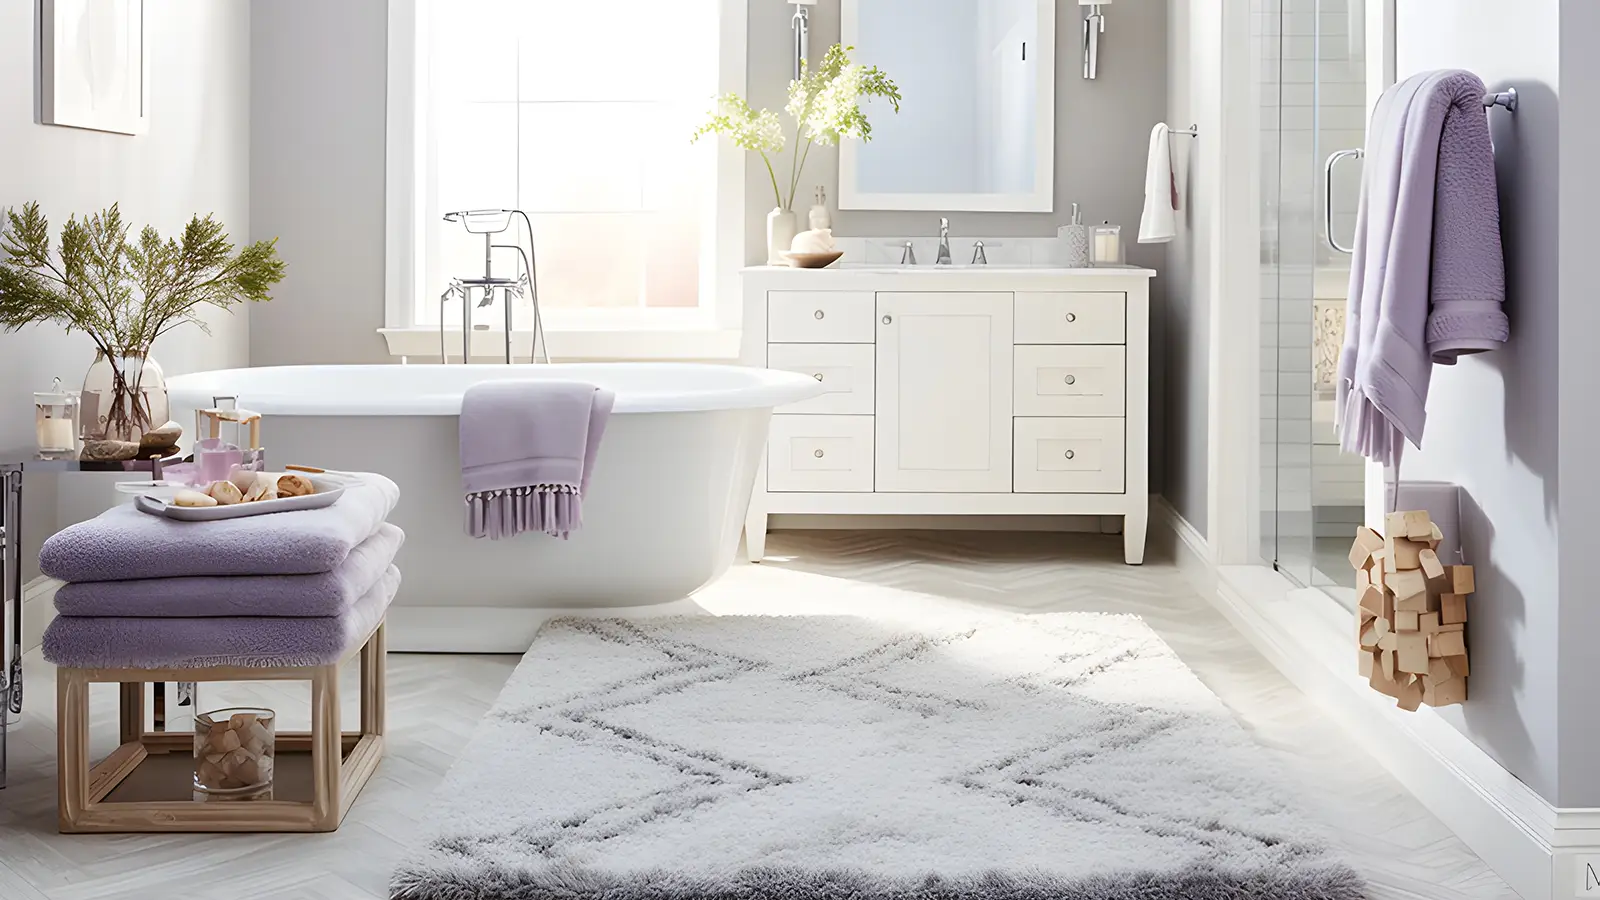 Learn how to decorate an apartment bathroom with a white tub and purple towels.